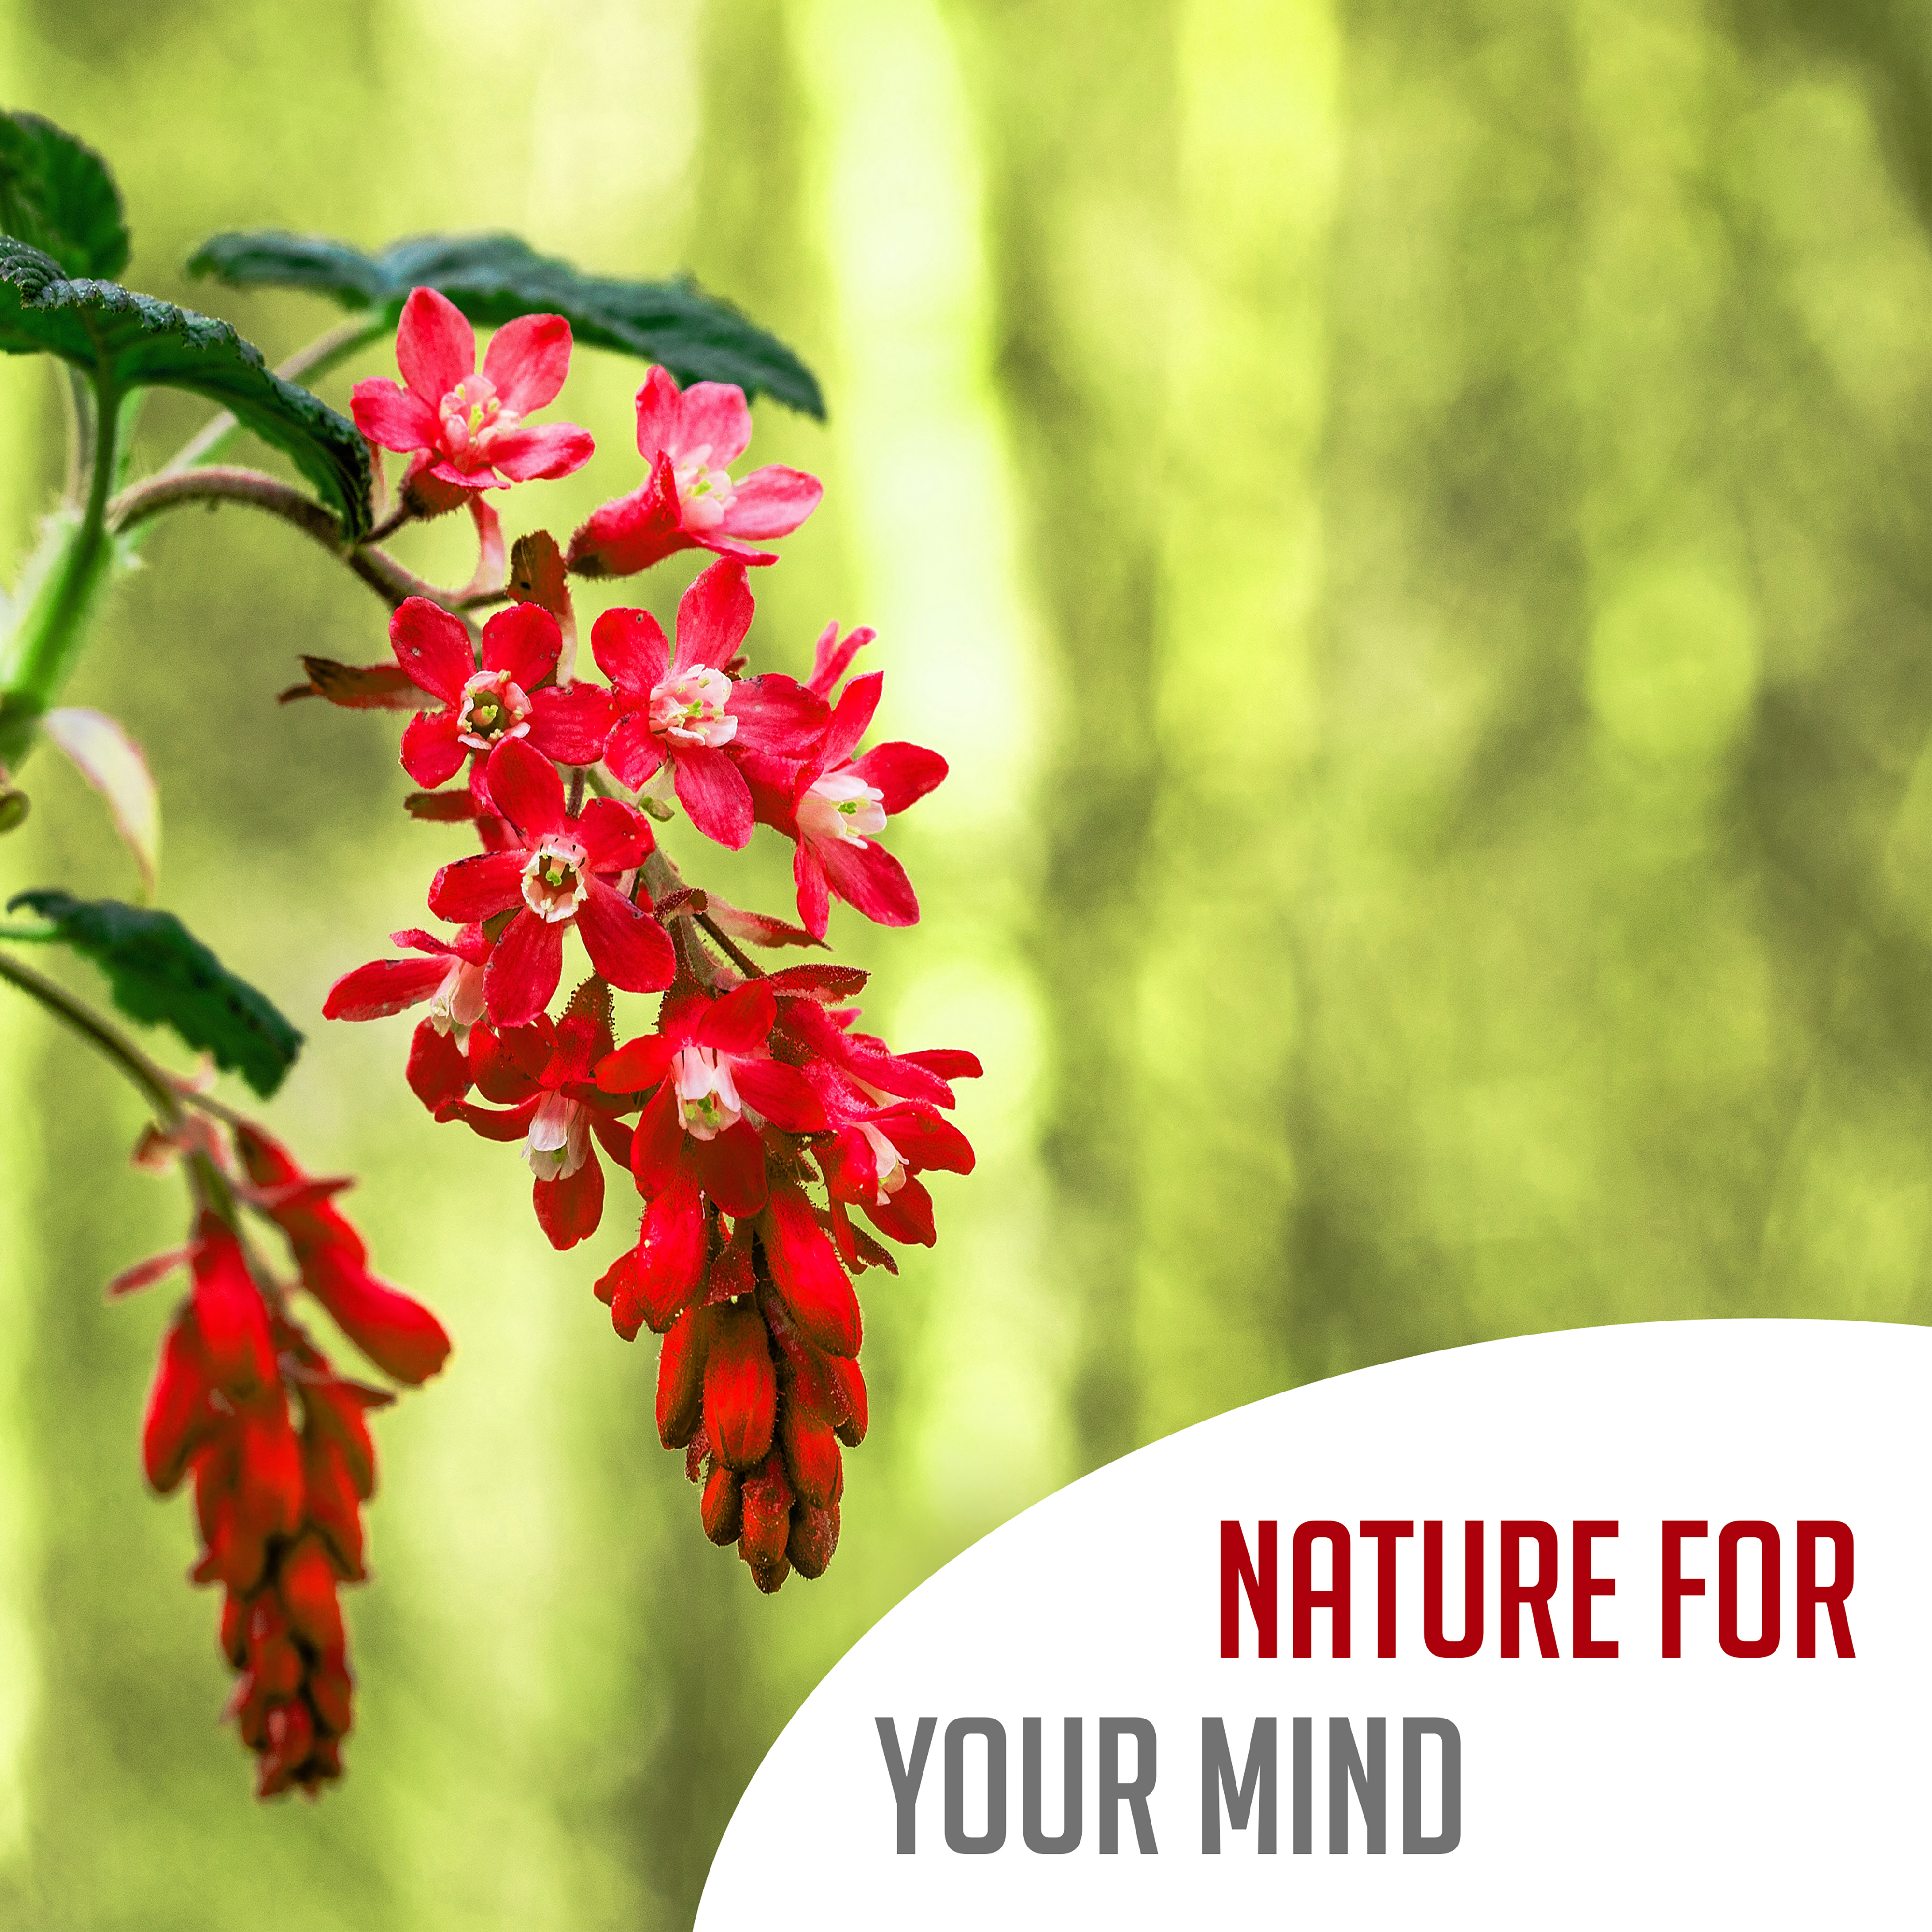 Nature for Your Mind – Calming Music for Relaxation, Soothing Nature Sounds, Rain, Free Birds, Wind, Meditation, Zen, Stress Relief